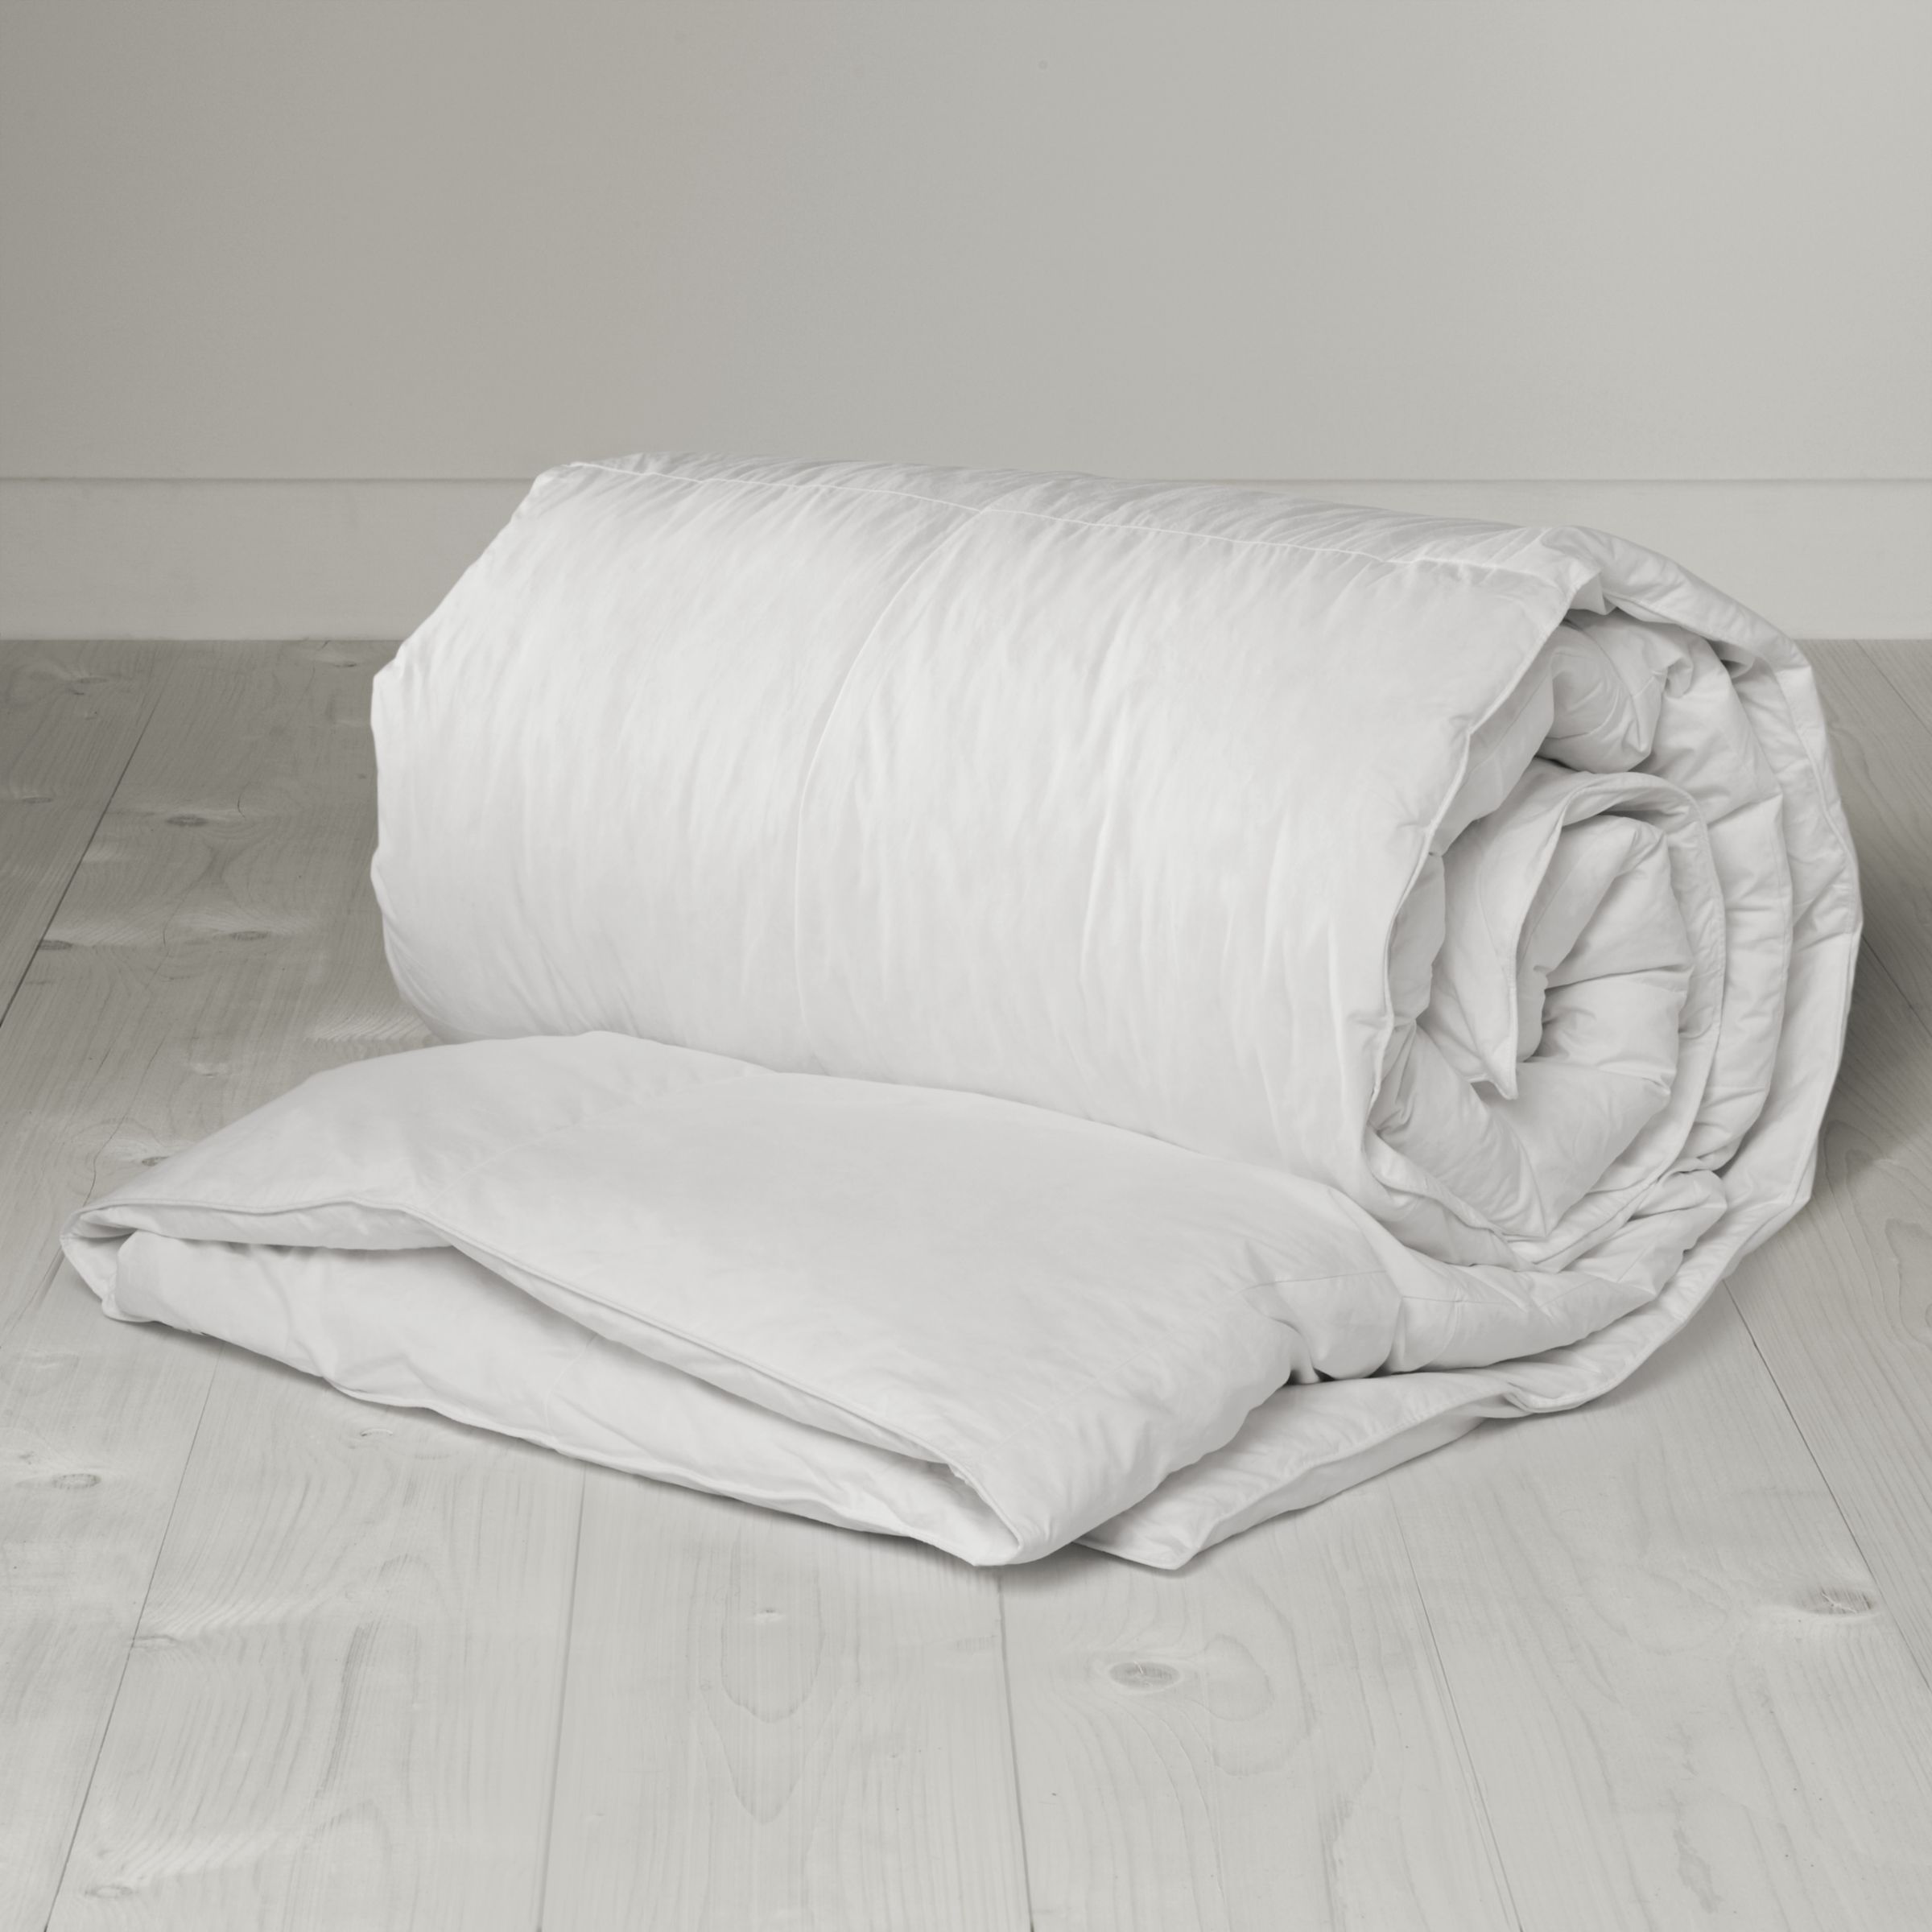 John Lewis Duck Feather and Down Duvets, 13.5